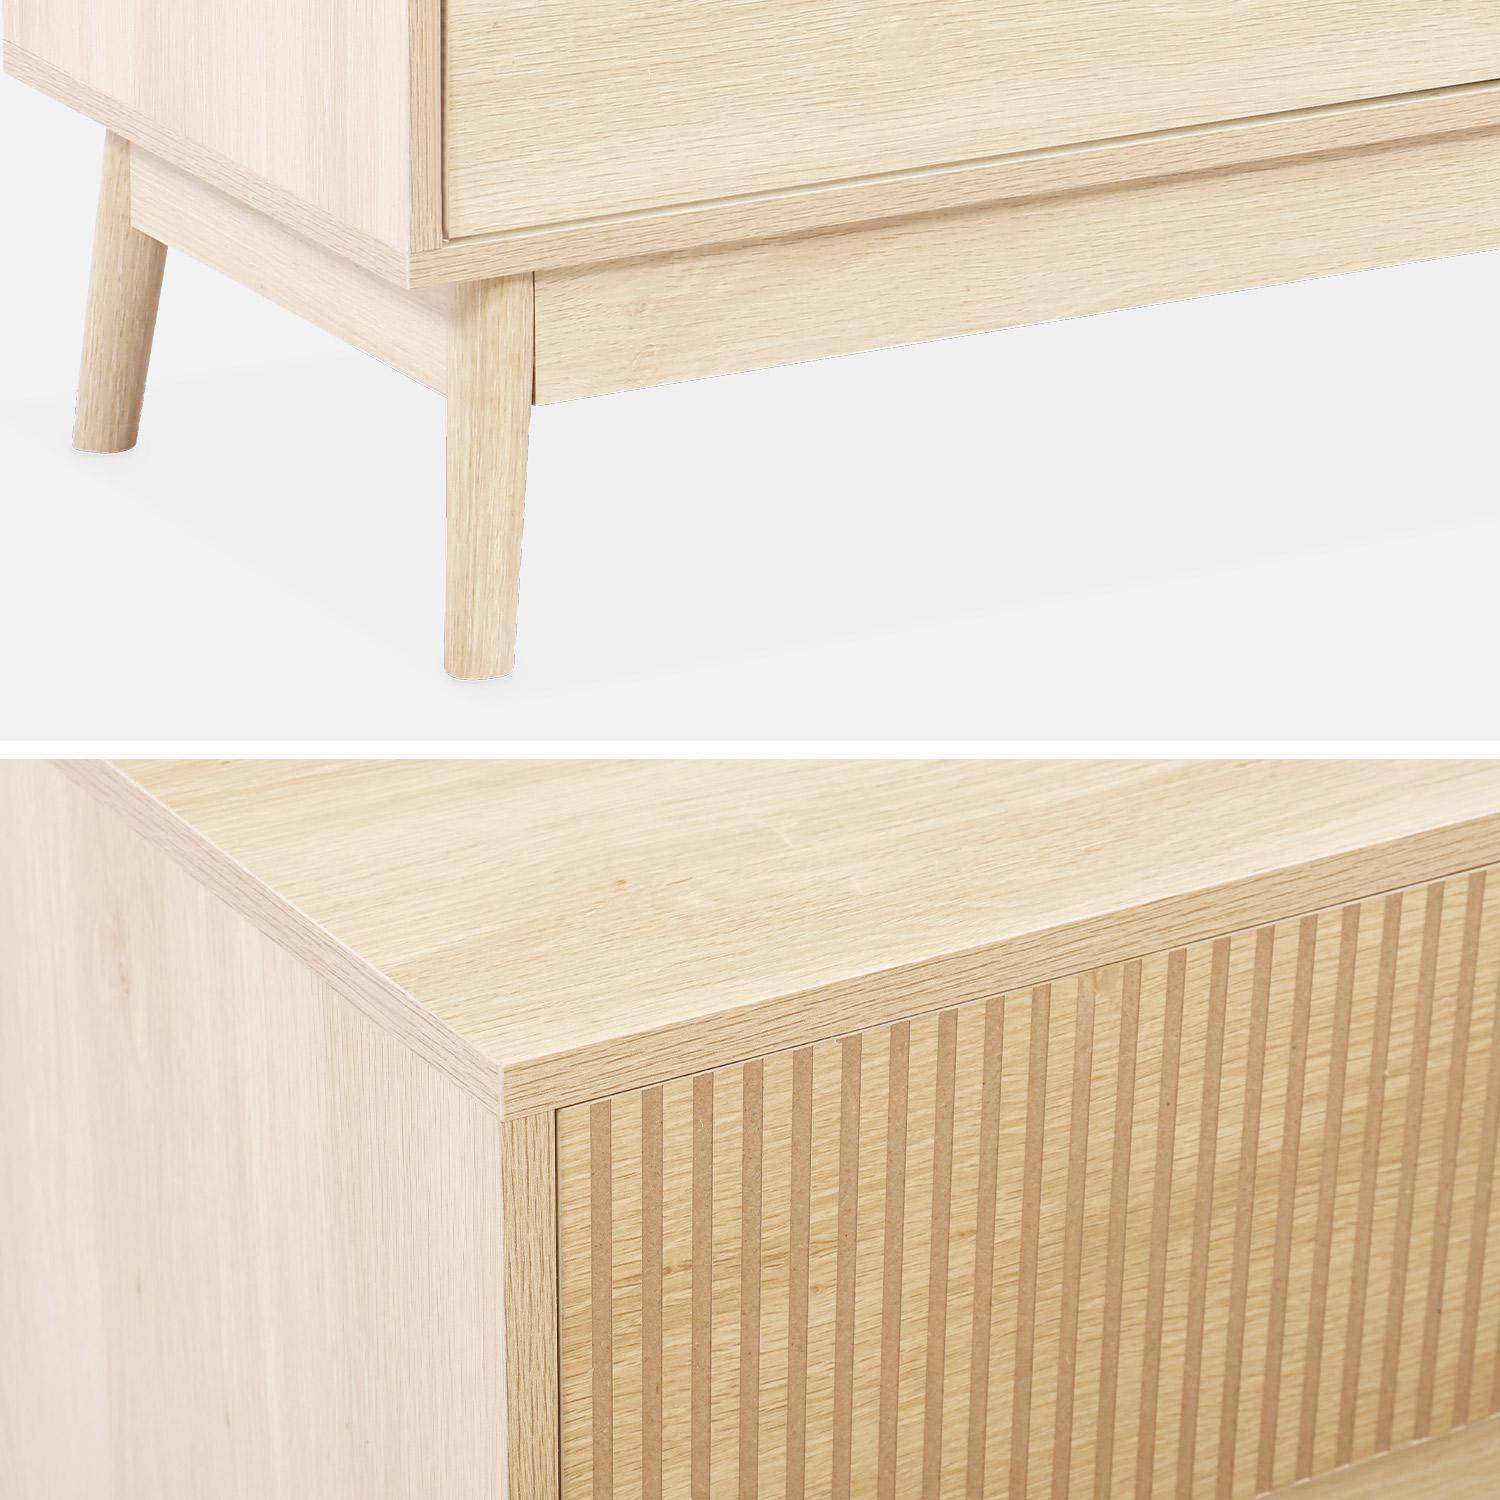 Grooved wood detail 3-drawer chest, 80x40x80cm - Linear - Natural Wood colour Photo6